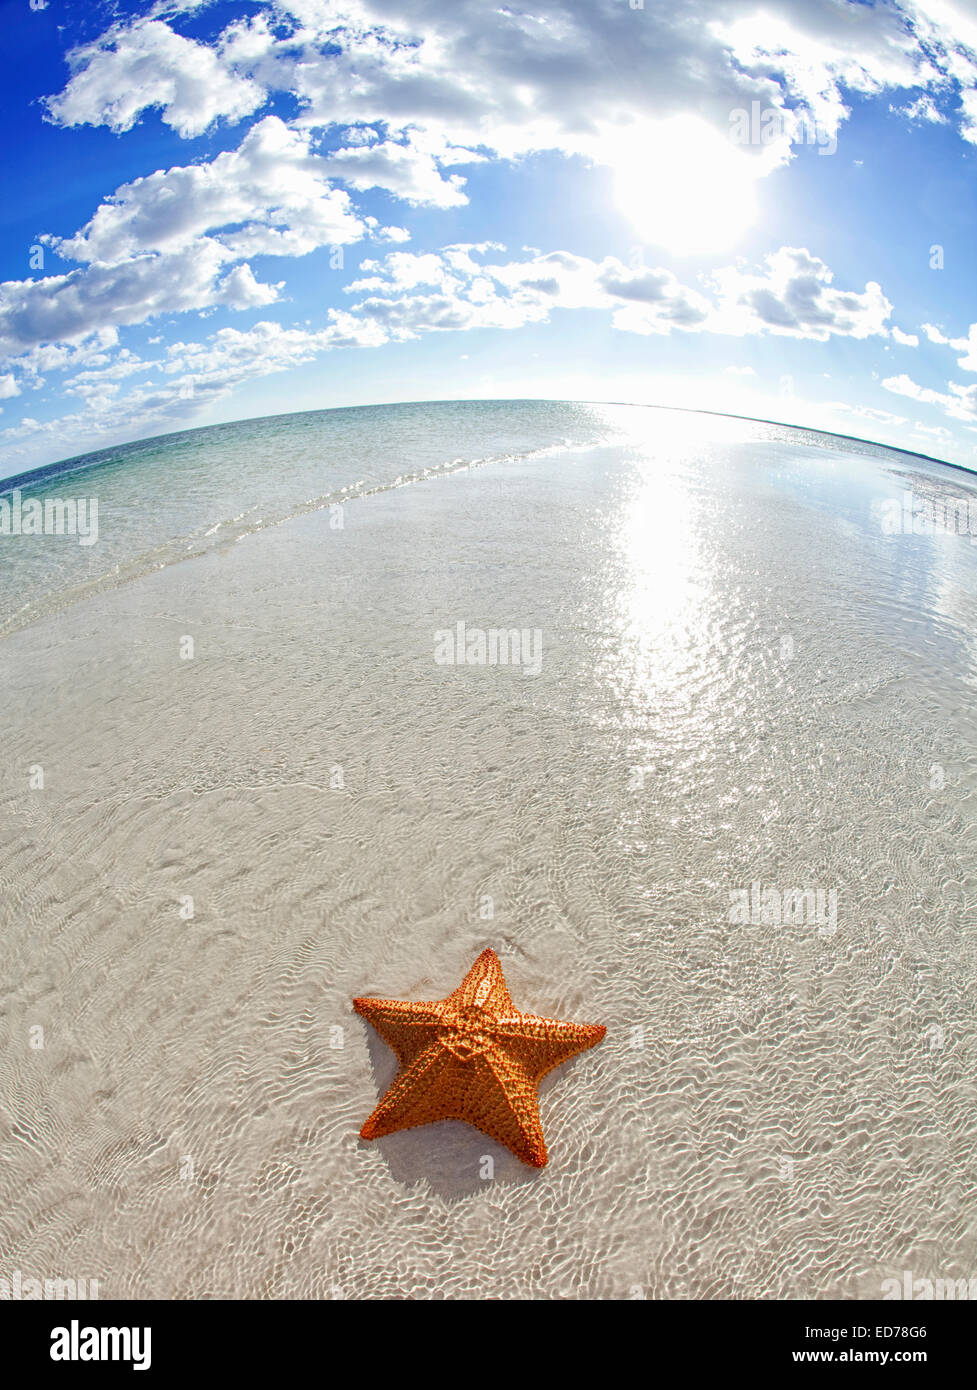 Starfish on tropical beach Banque D'Images